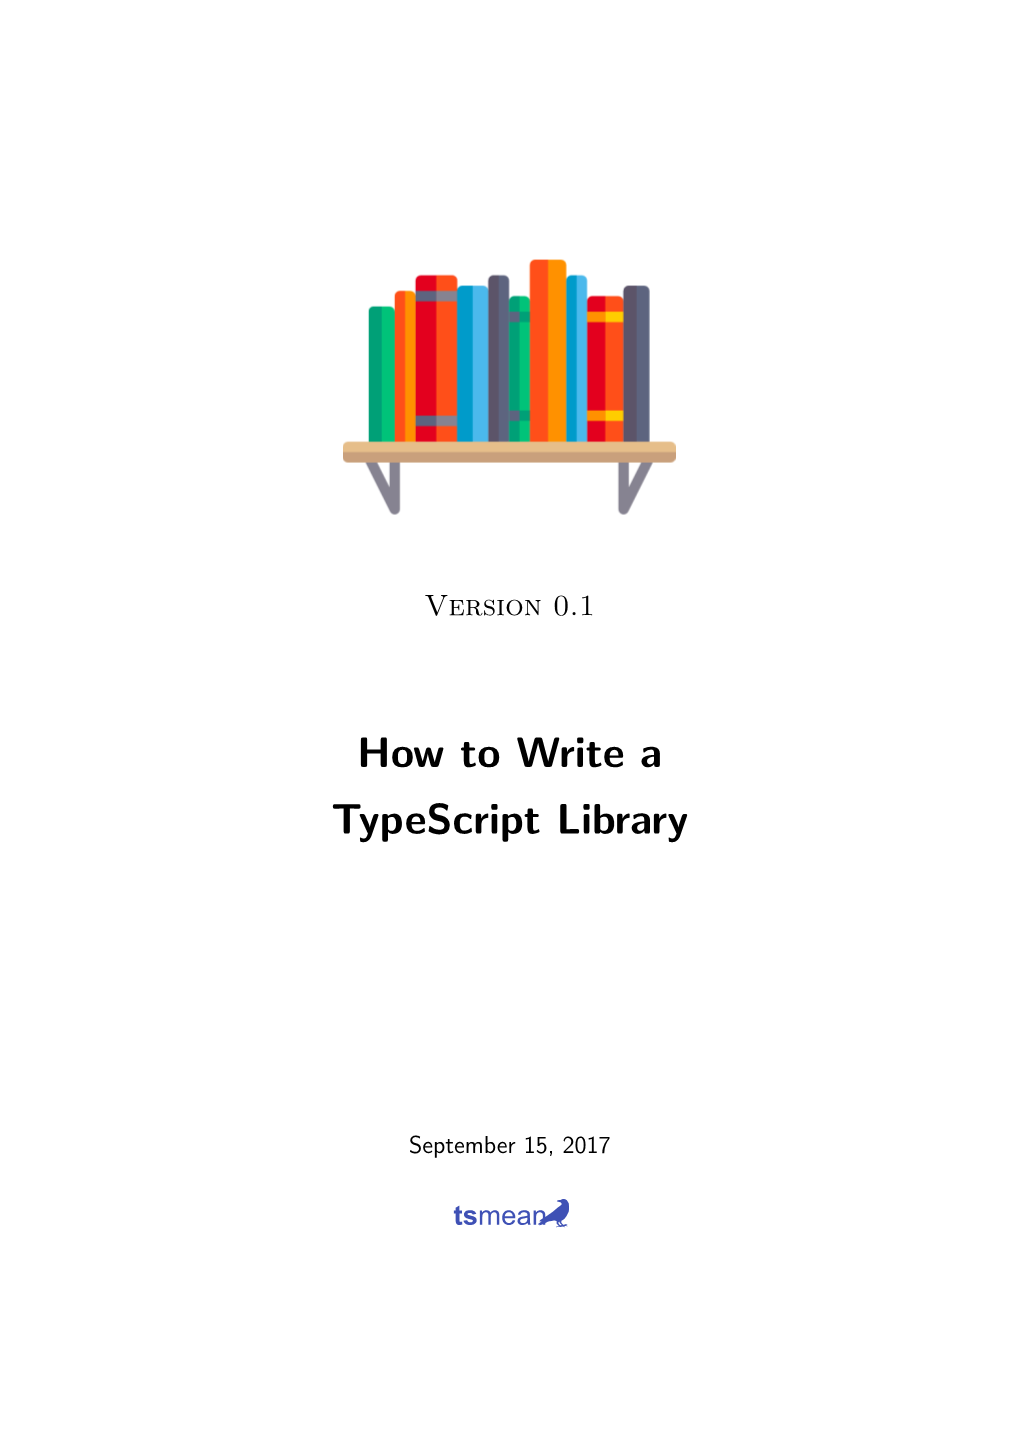 How to Write a Typescript Library